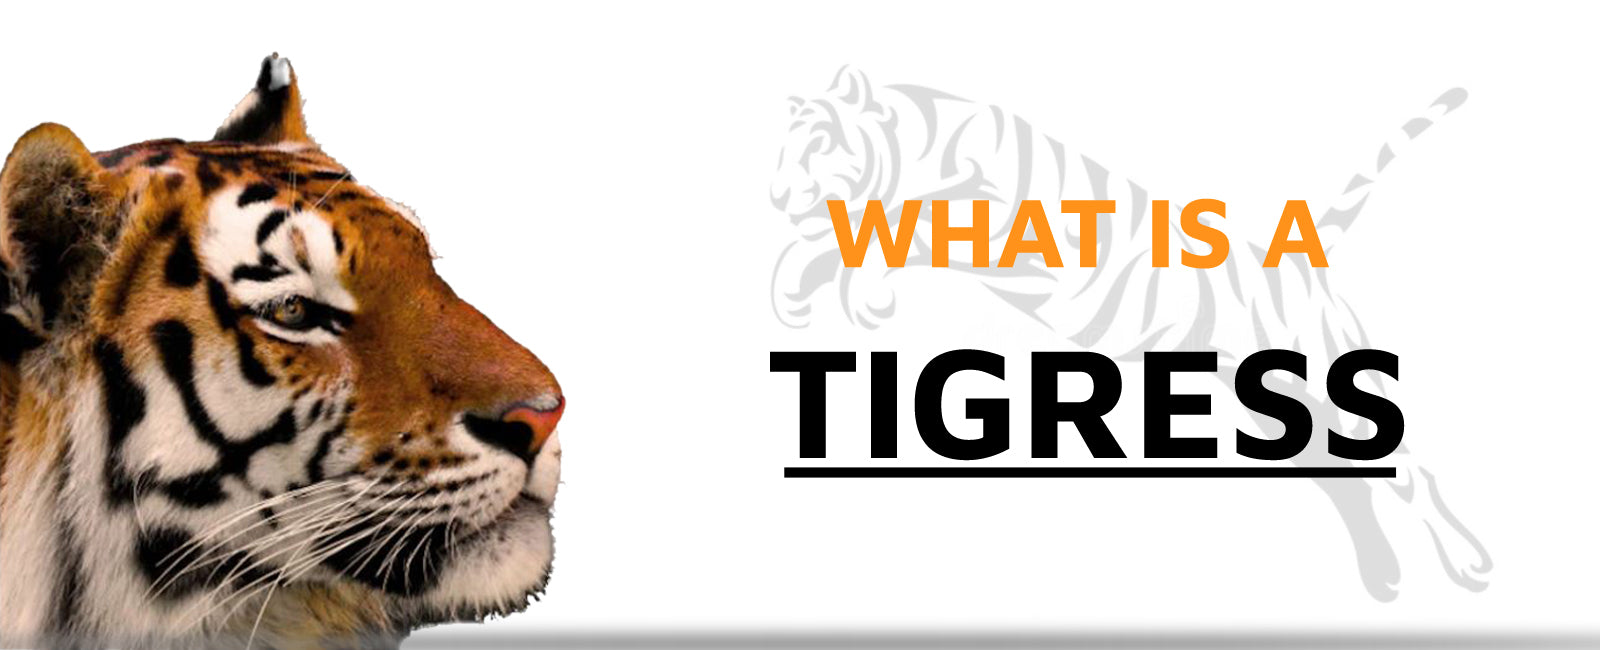 What is a Tigress?